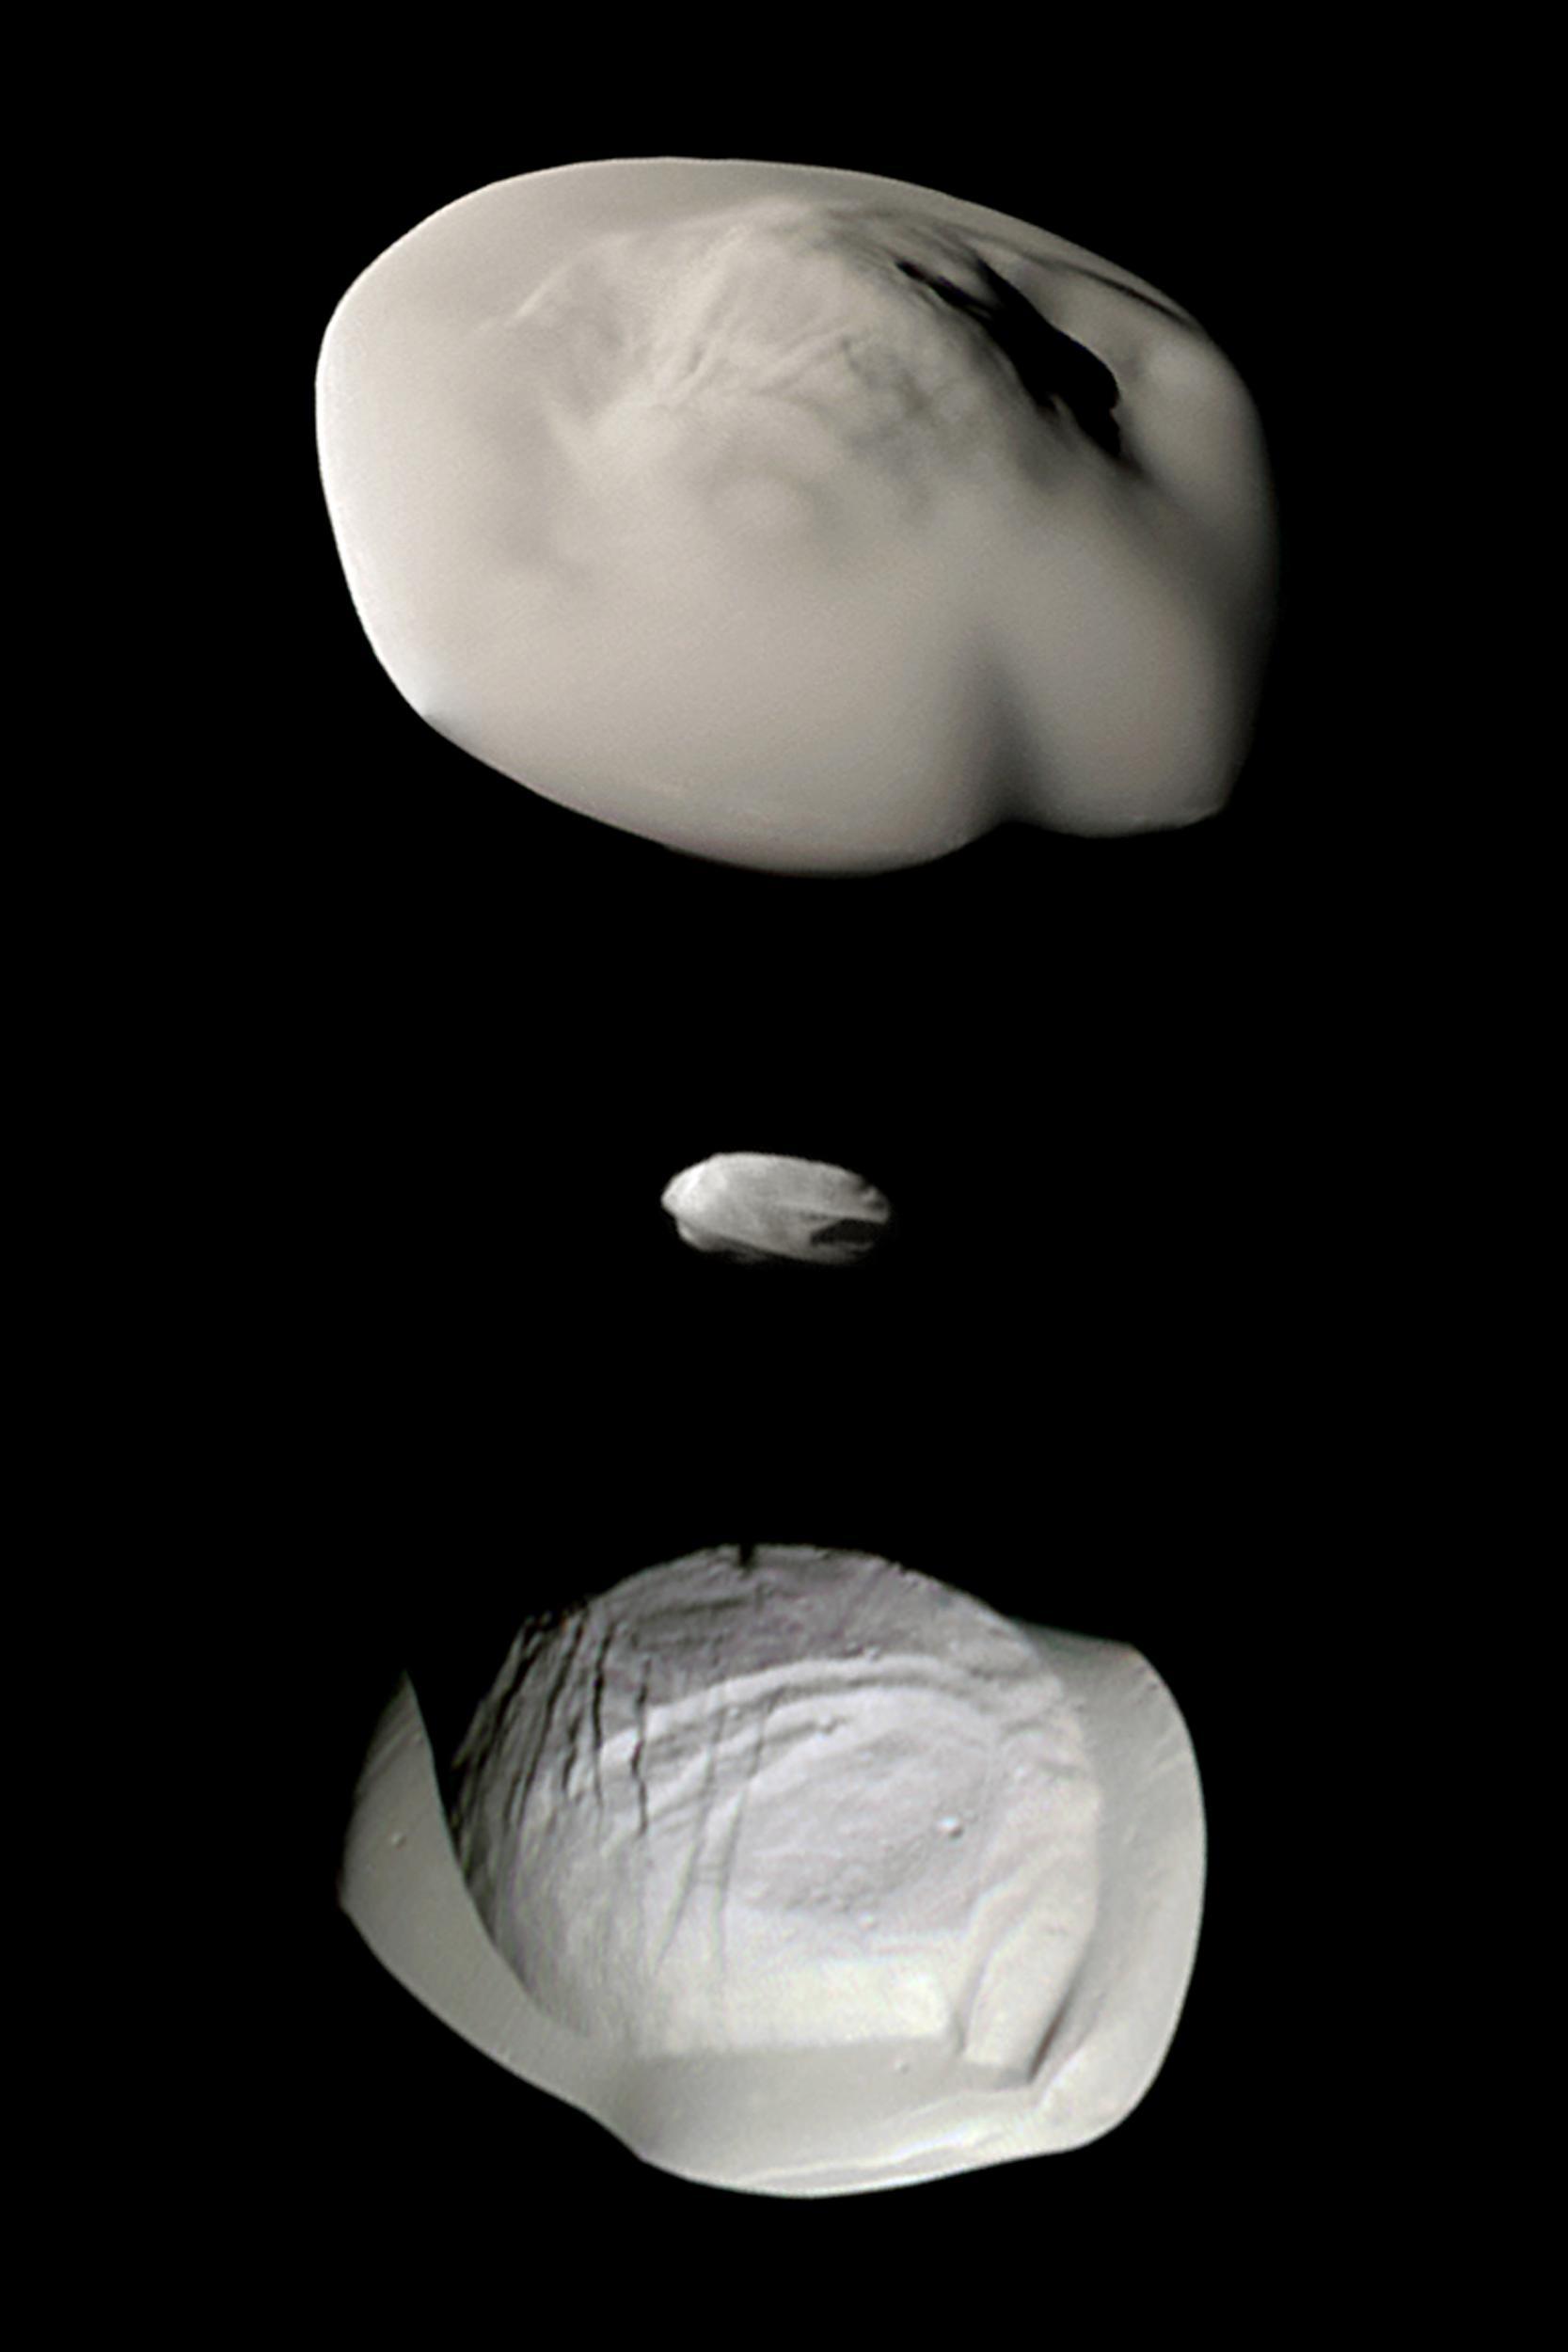 Images of Atlas, Daphnis and Pan, taken by Cassini.